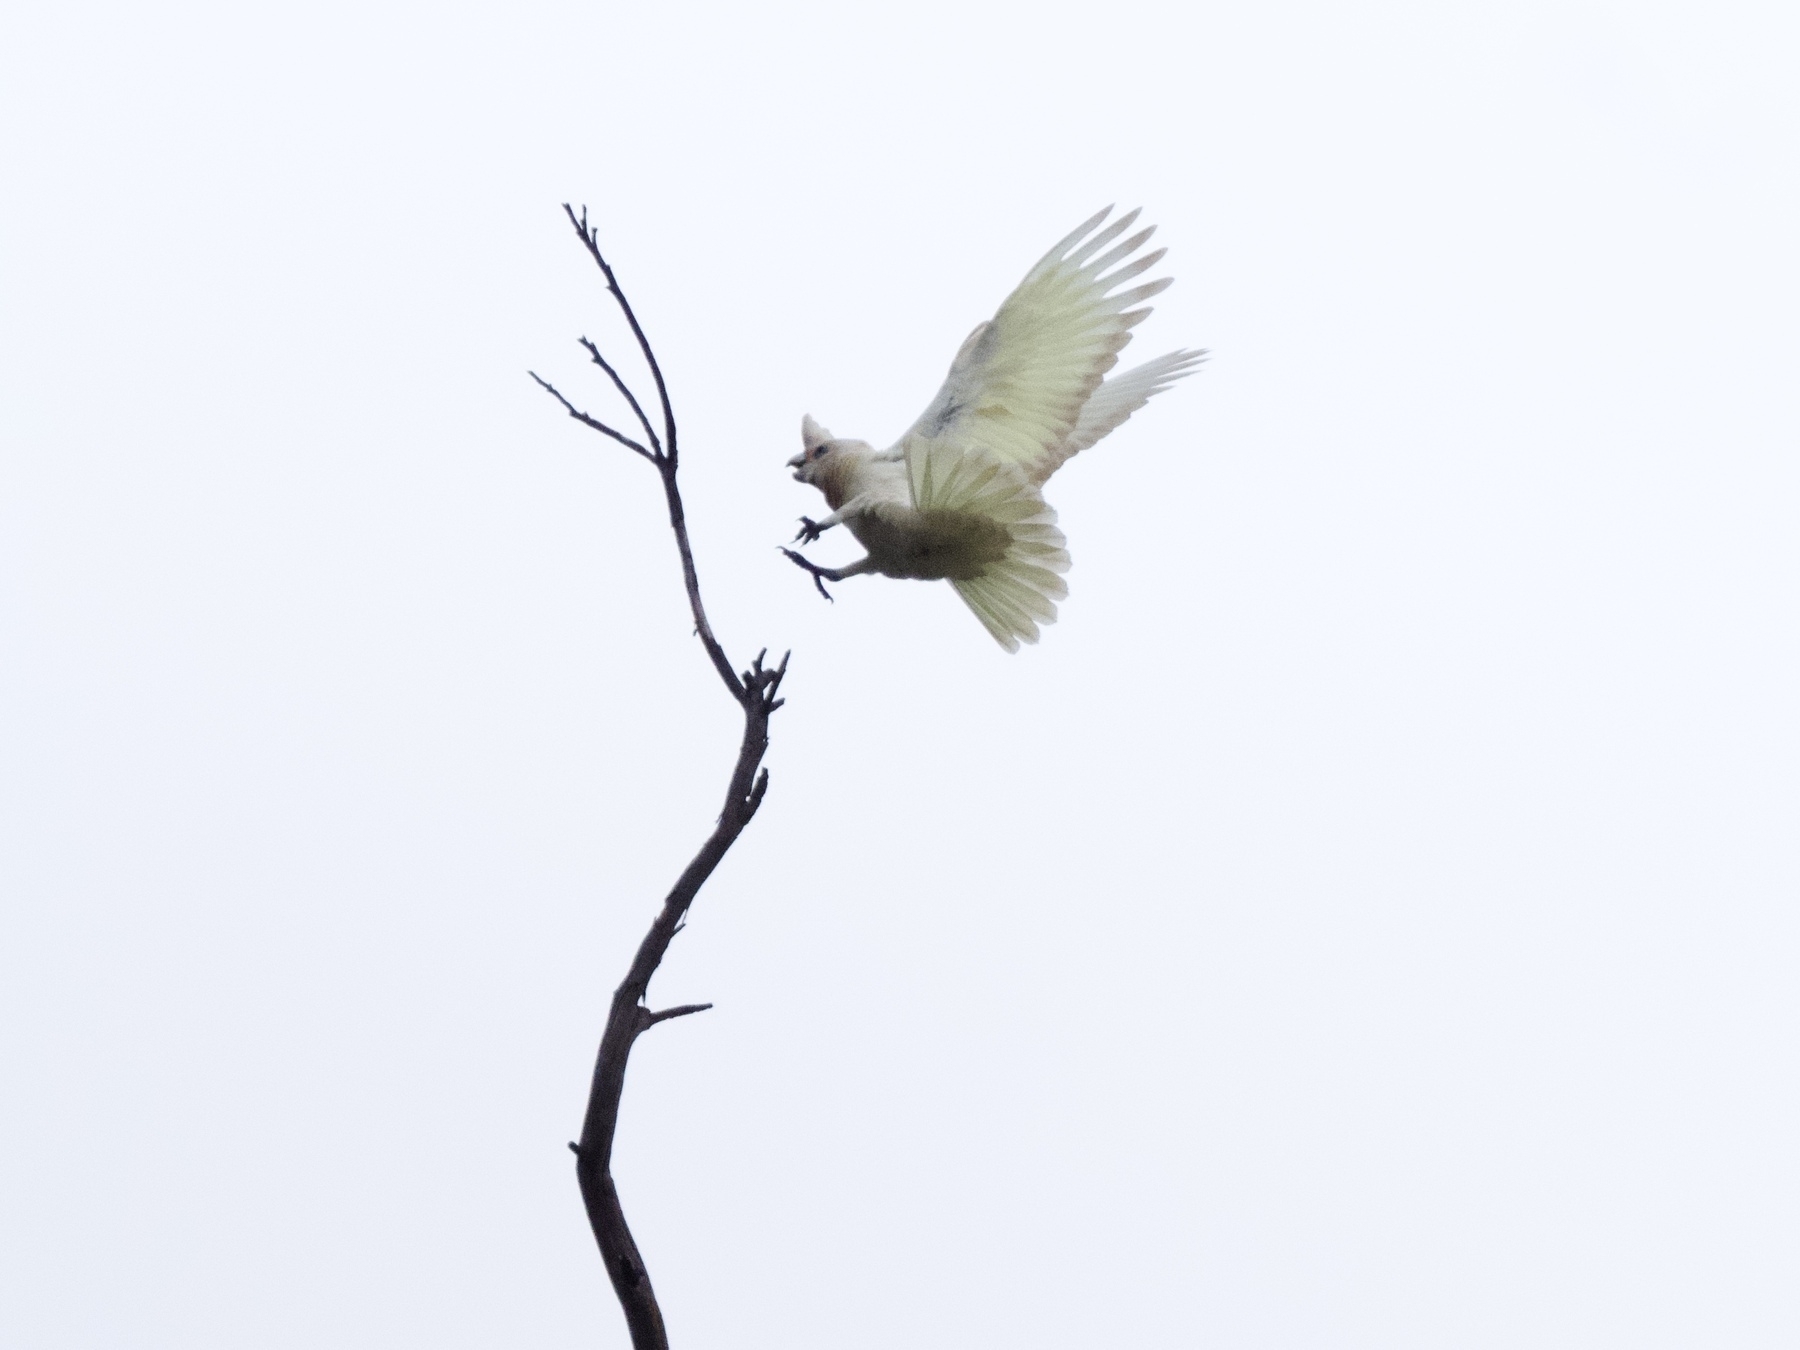 A corella swoops against an overcast sky to land on a high, leafless branch.